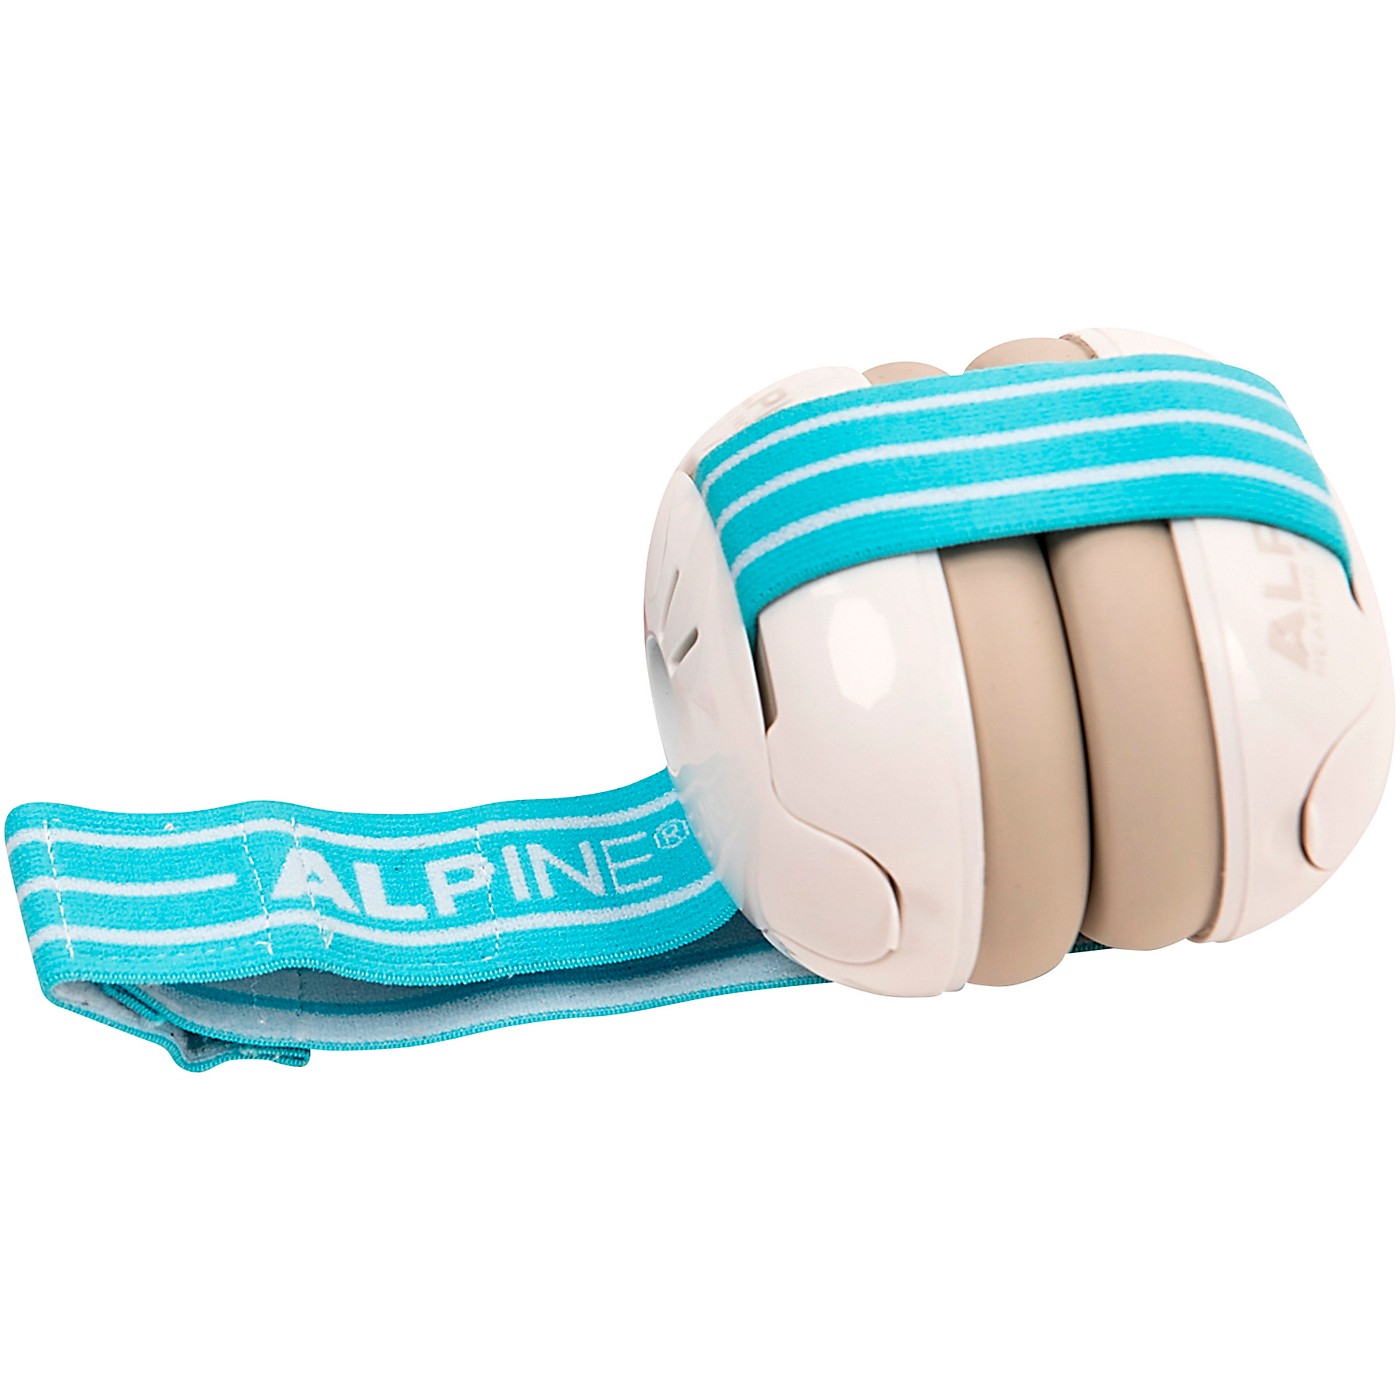 Alpine Hearing Protection Muffy Baby Blue Protective Headphones thumbnail